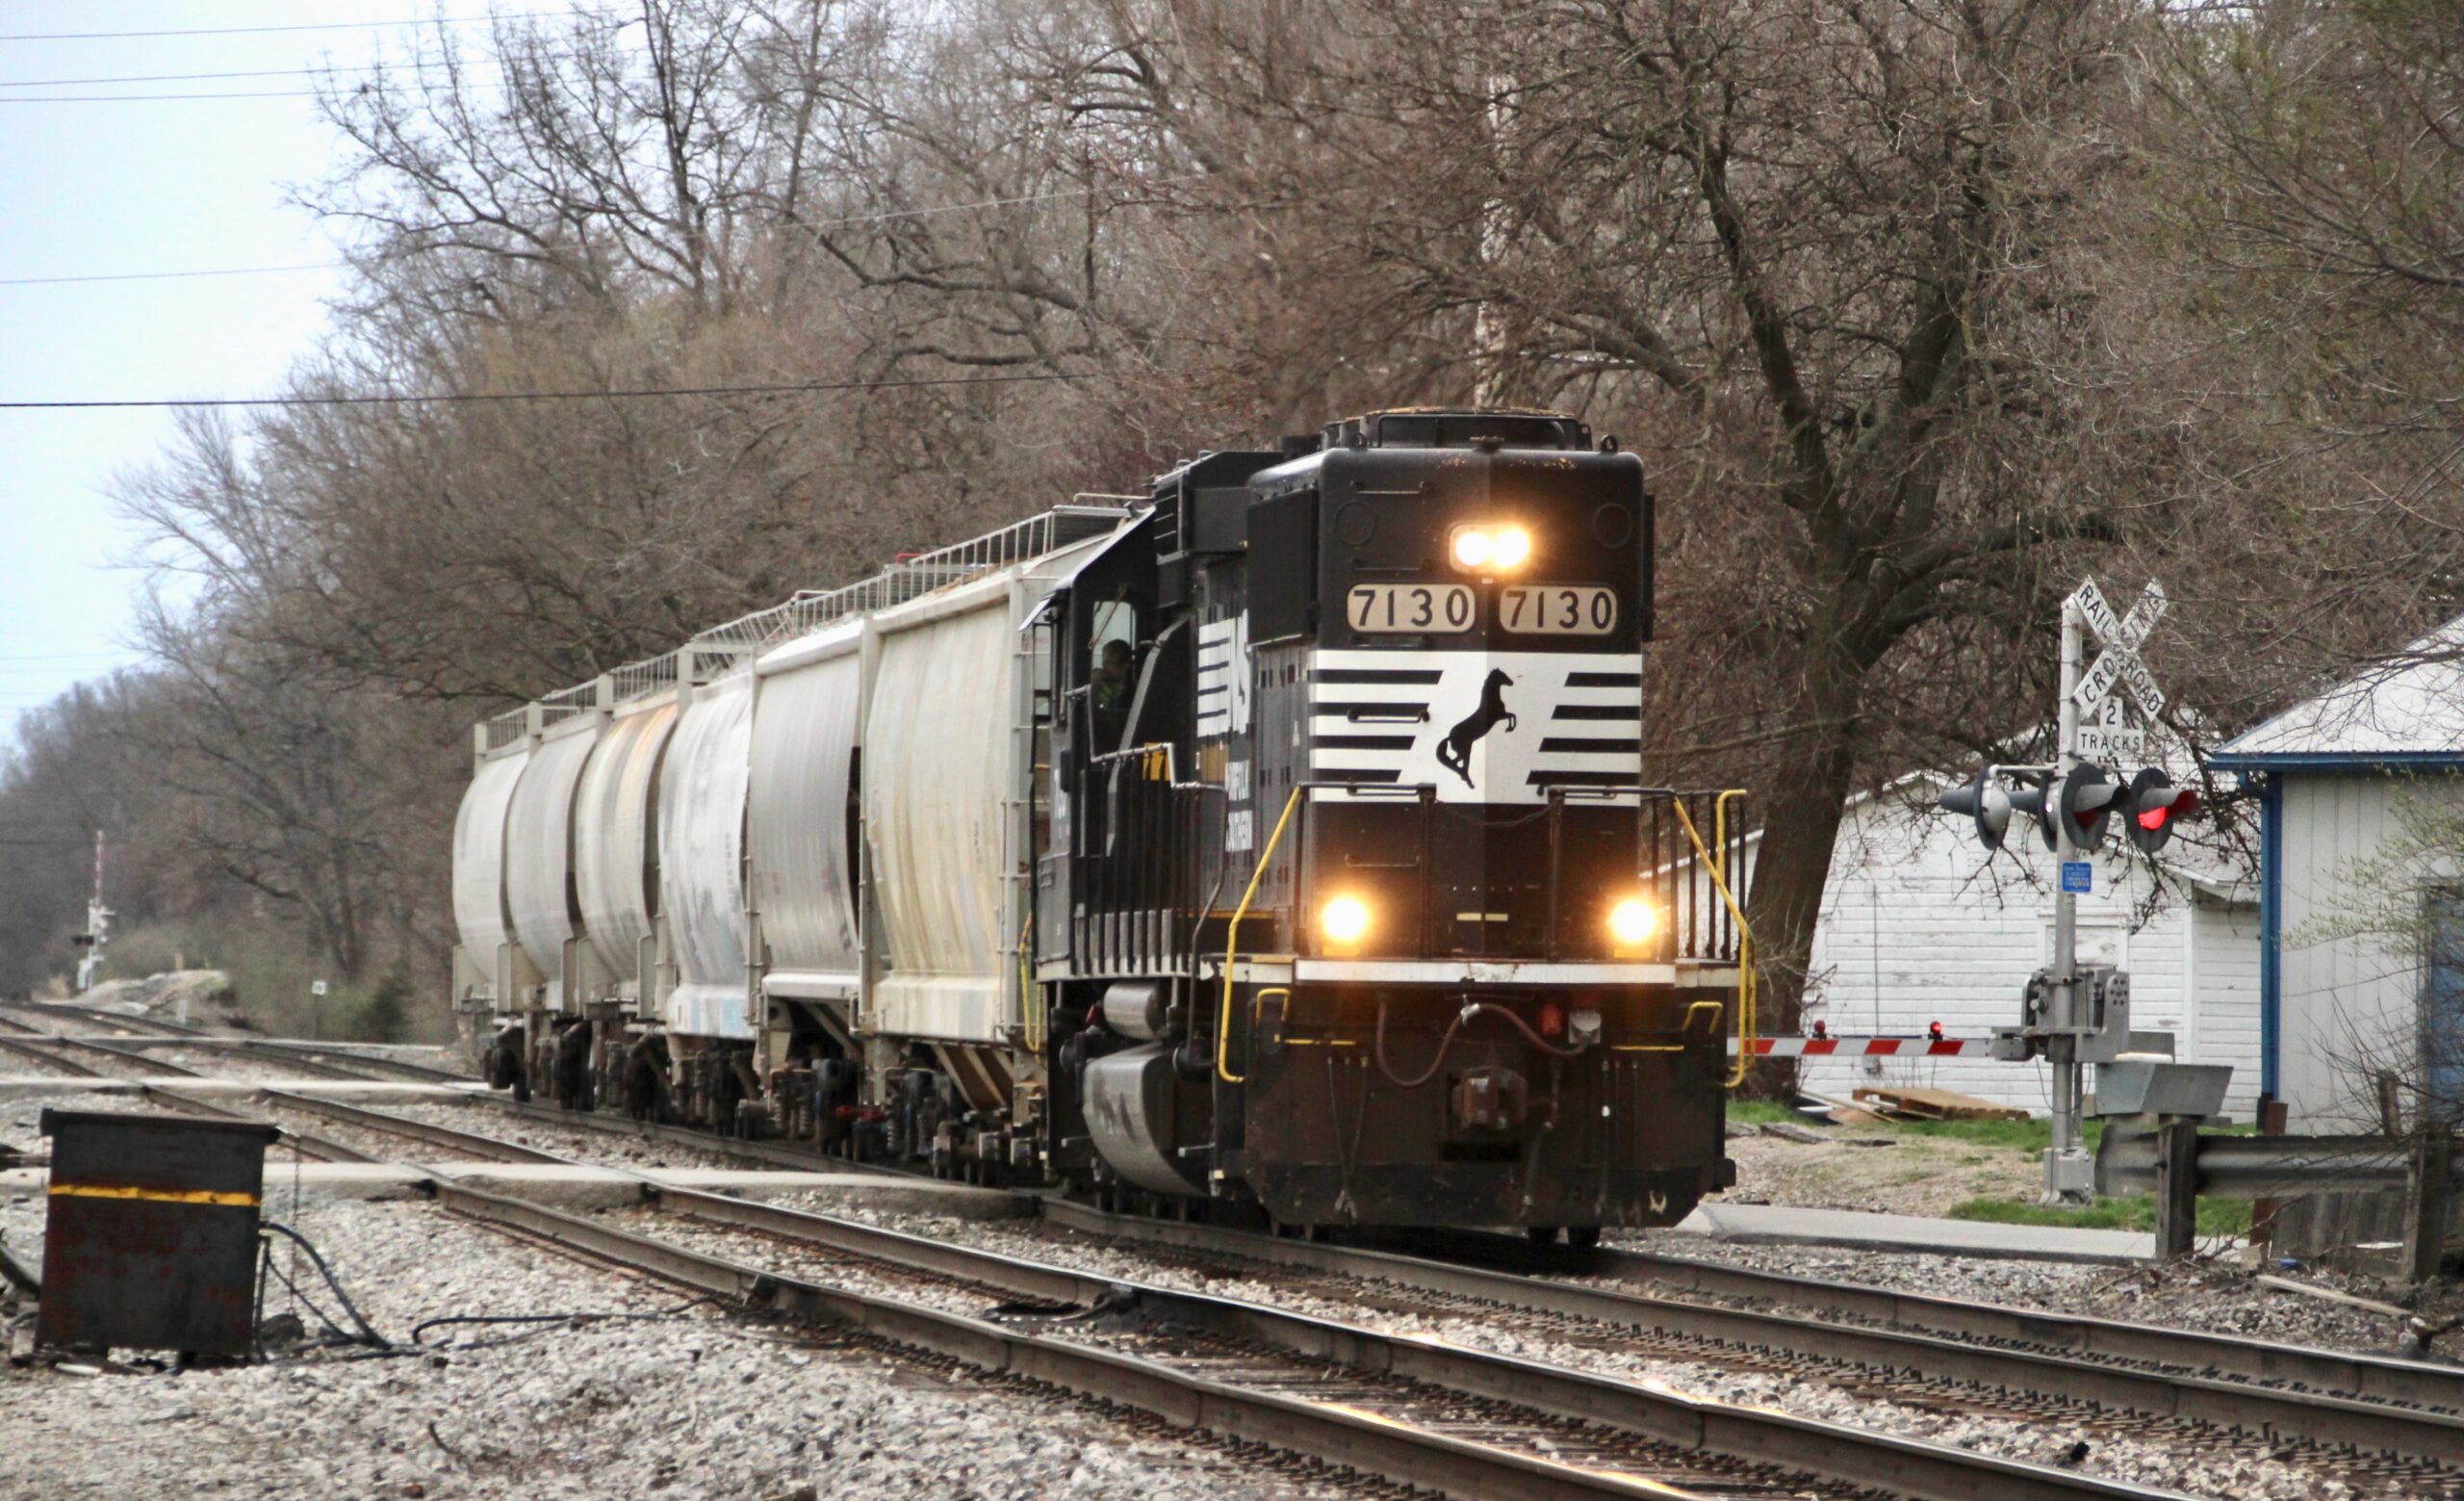 A six-car local freight train led by a black and white diesel engine. first-mile, final-mile markets